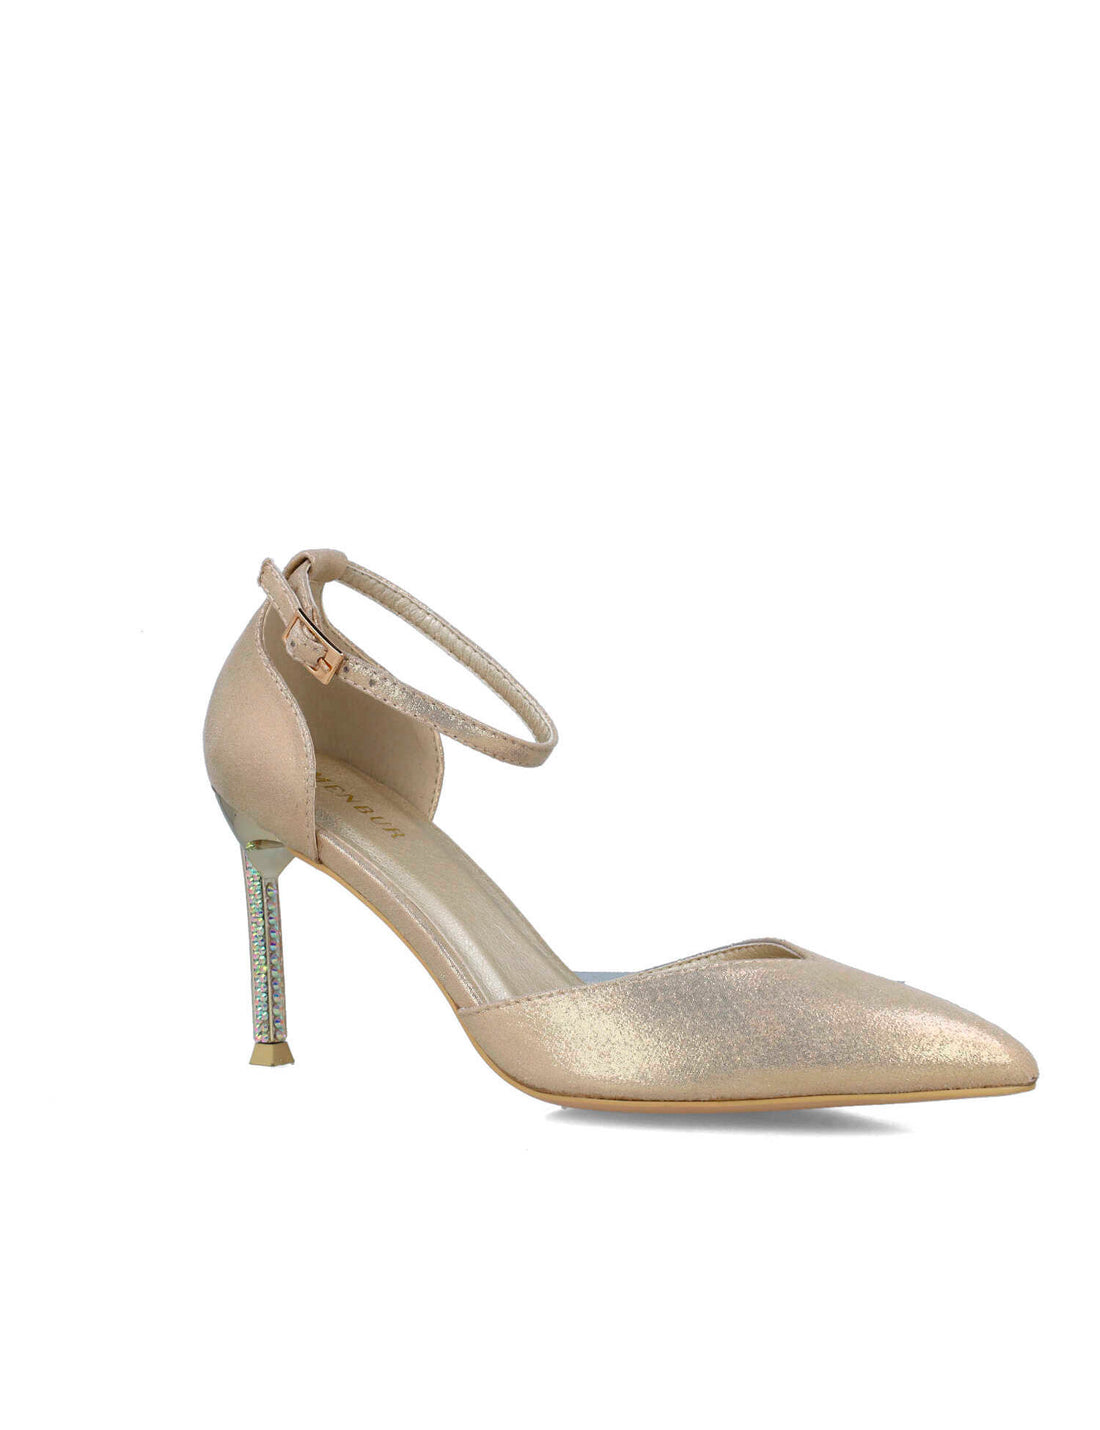 Gold Pumps With Ankle Strap_24710_00_02